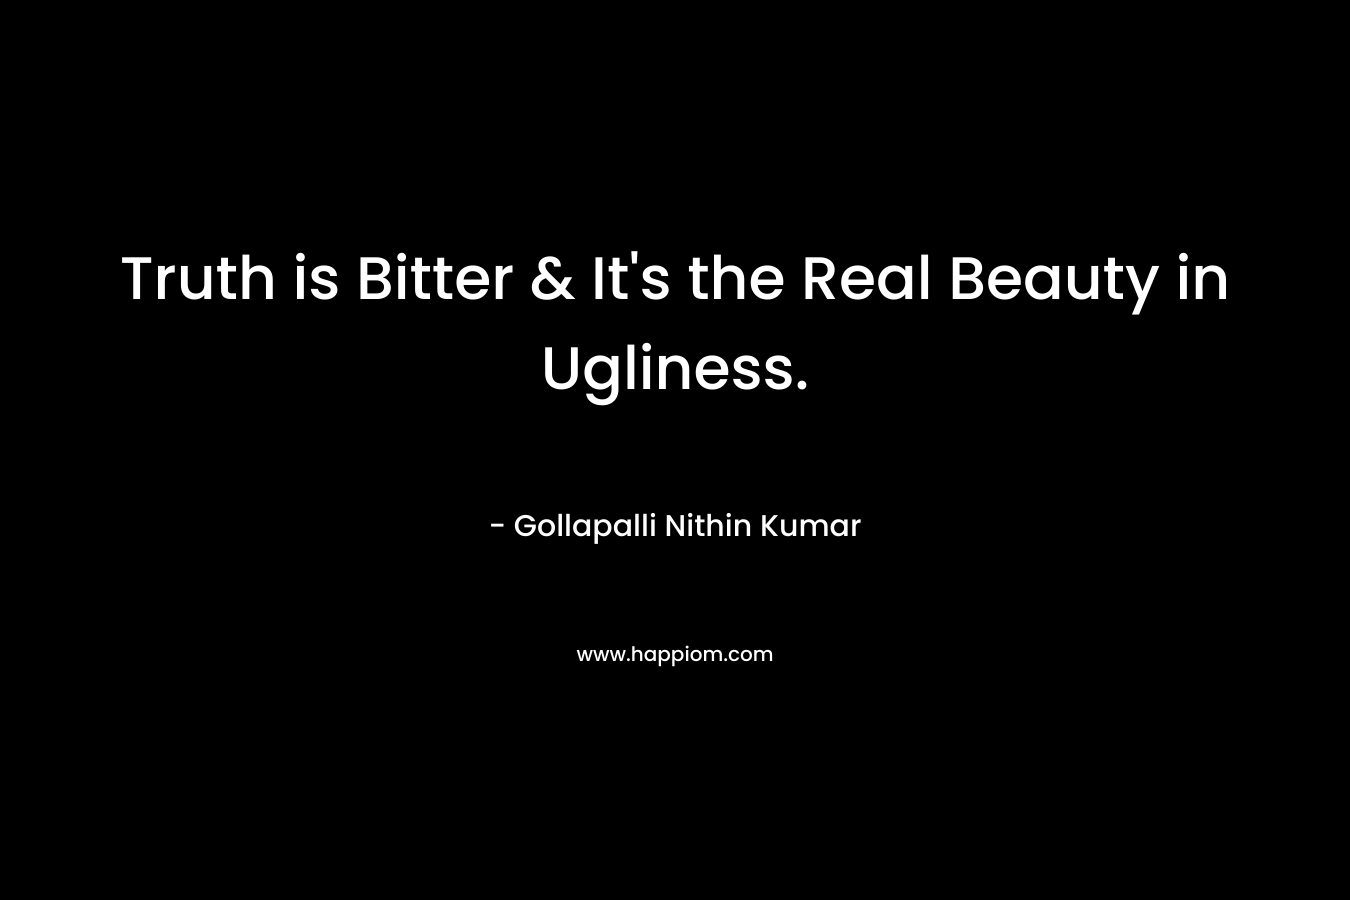 Truth is Bitter & It’s the Real Beauty in Ugliness. – Gollapalli Nithin Kumar